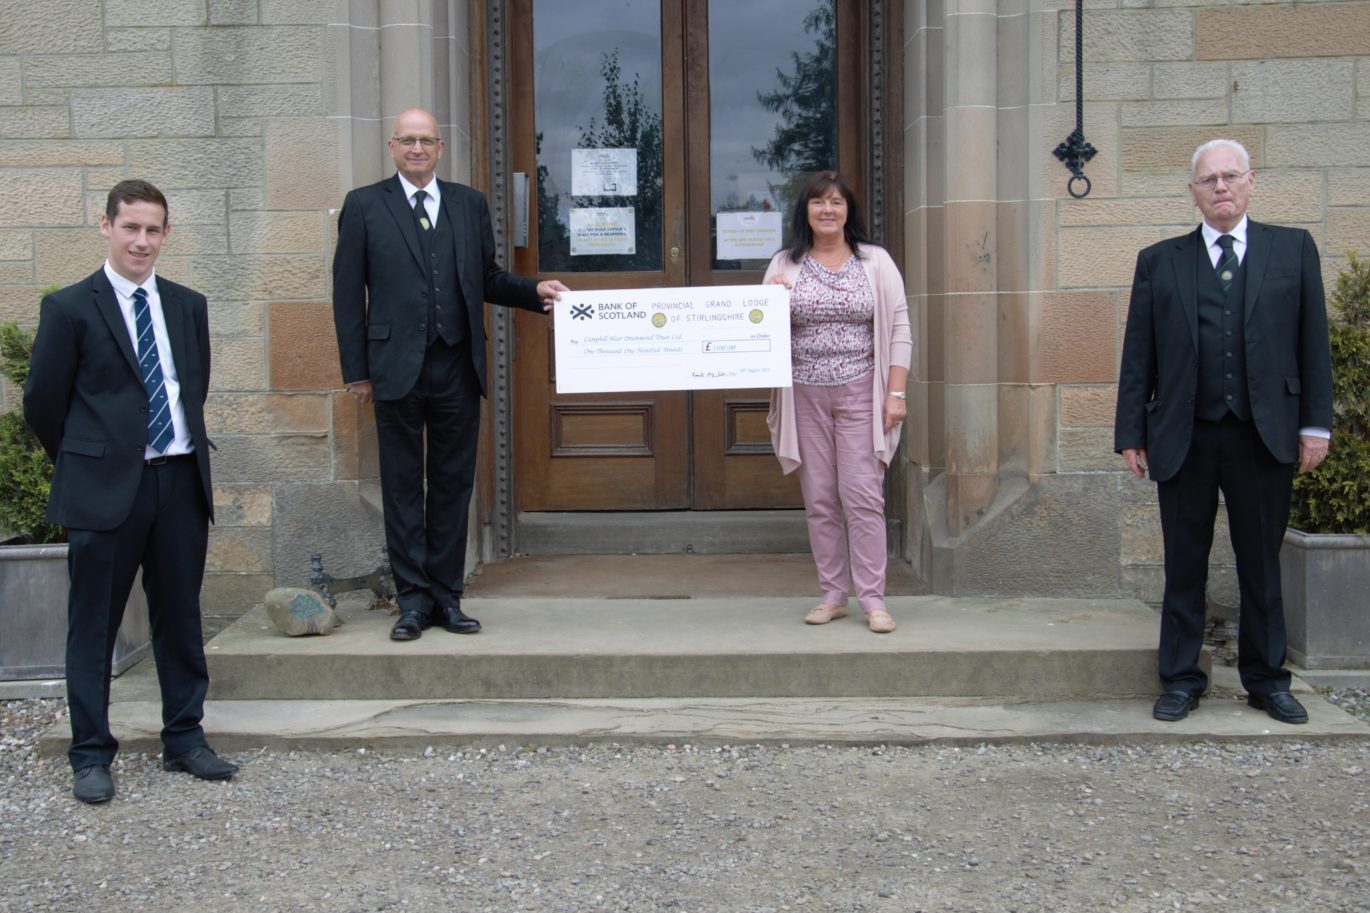 Generous donation from the Provincial Lodge of Stirlingshire - Last week we had a very generous donation from the Provincial Lodge of Stirlingshire.